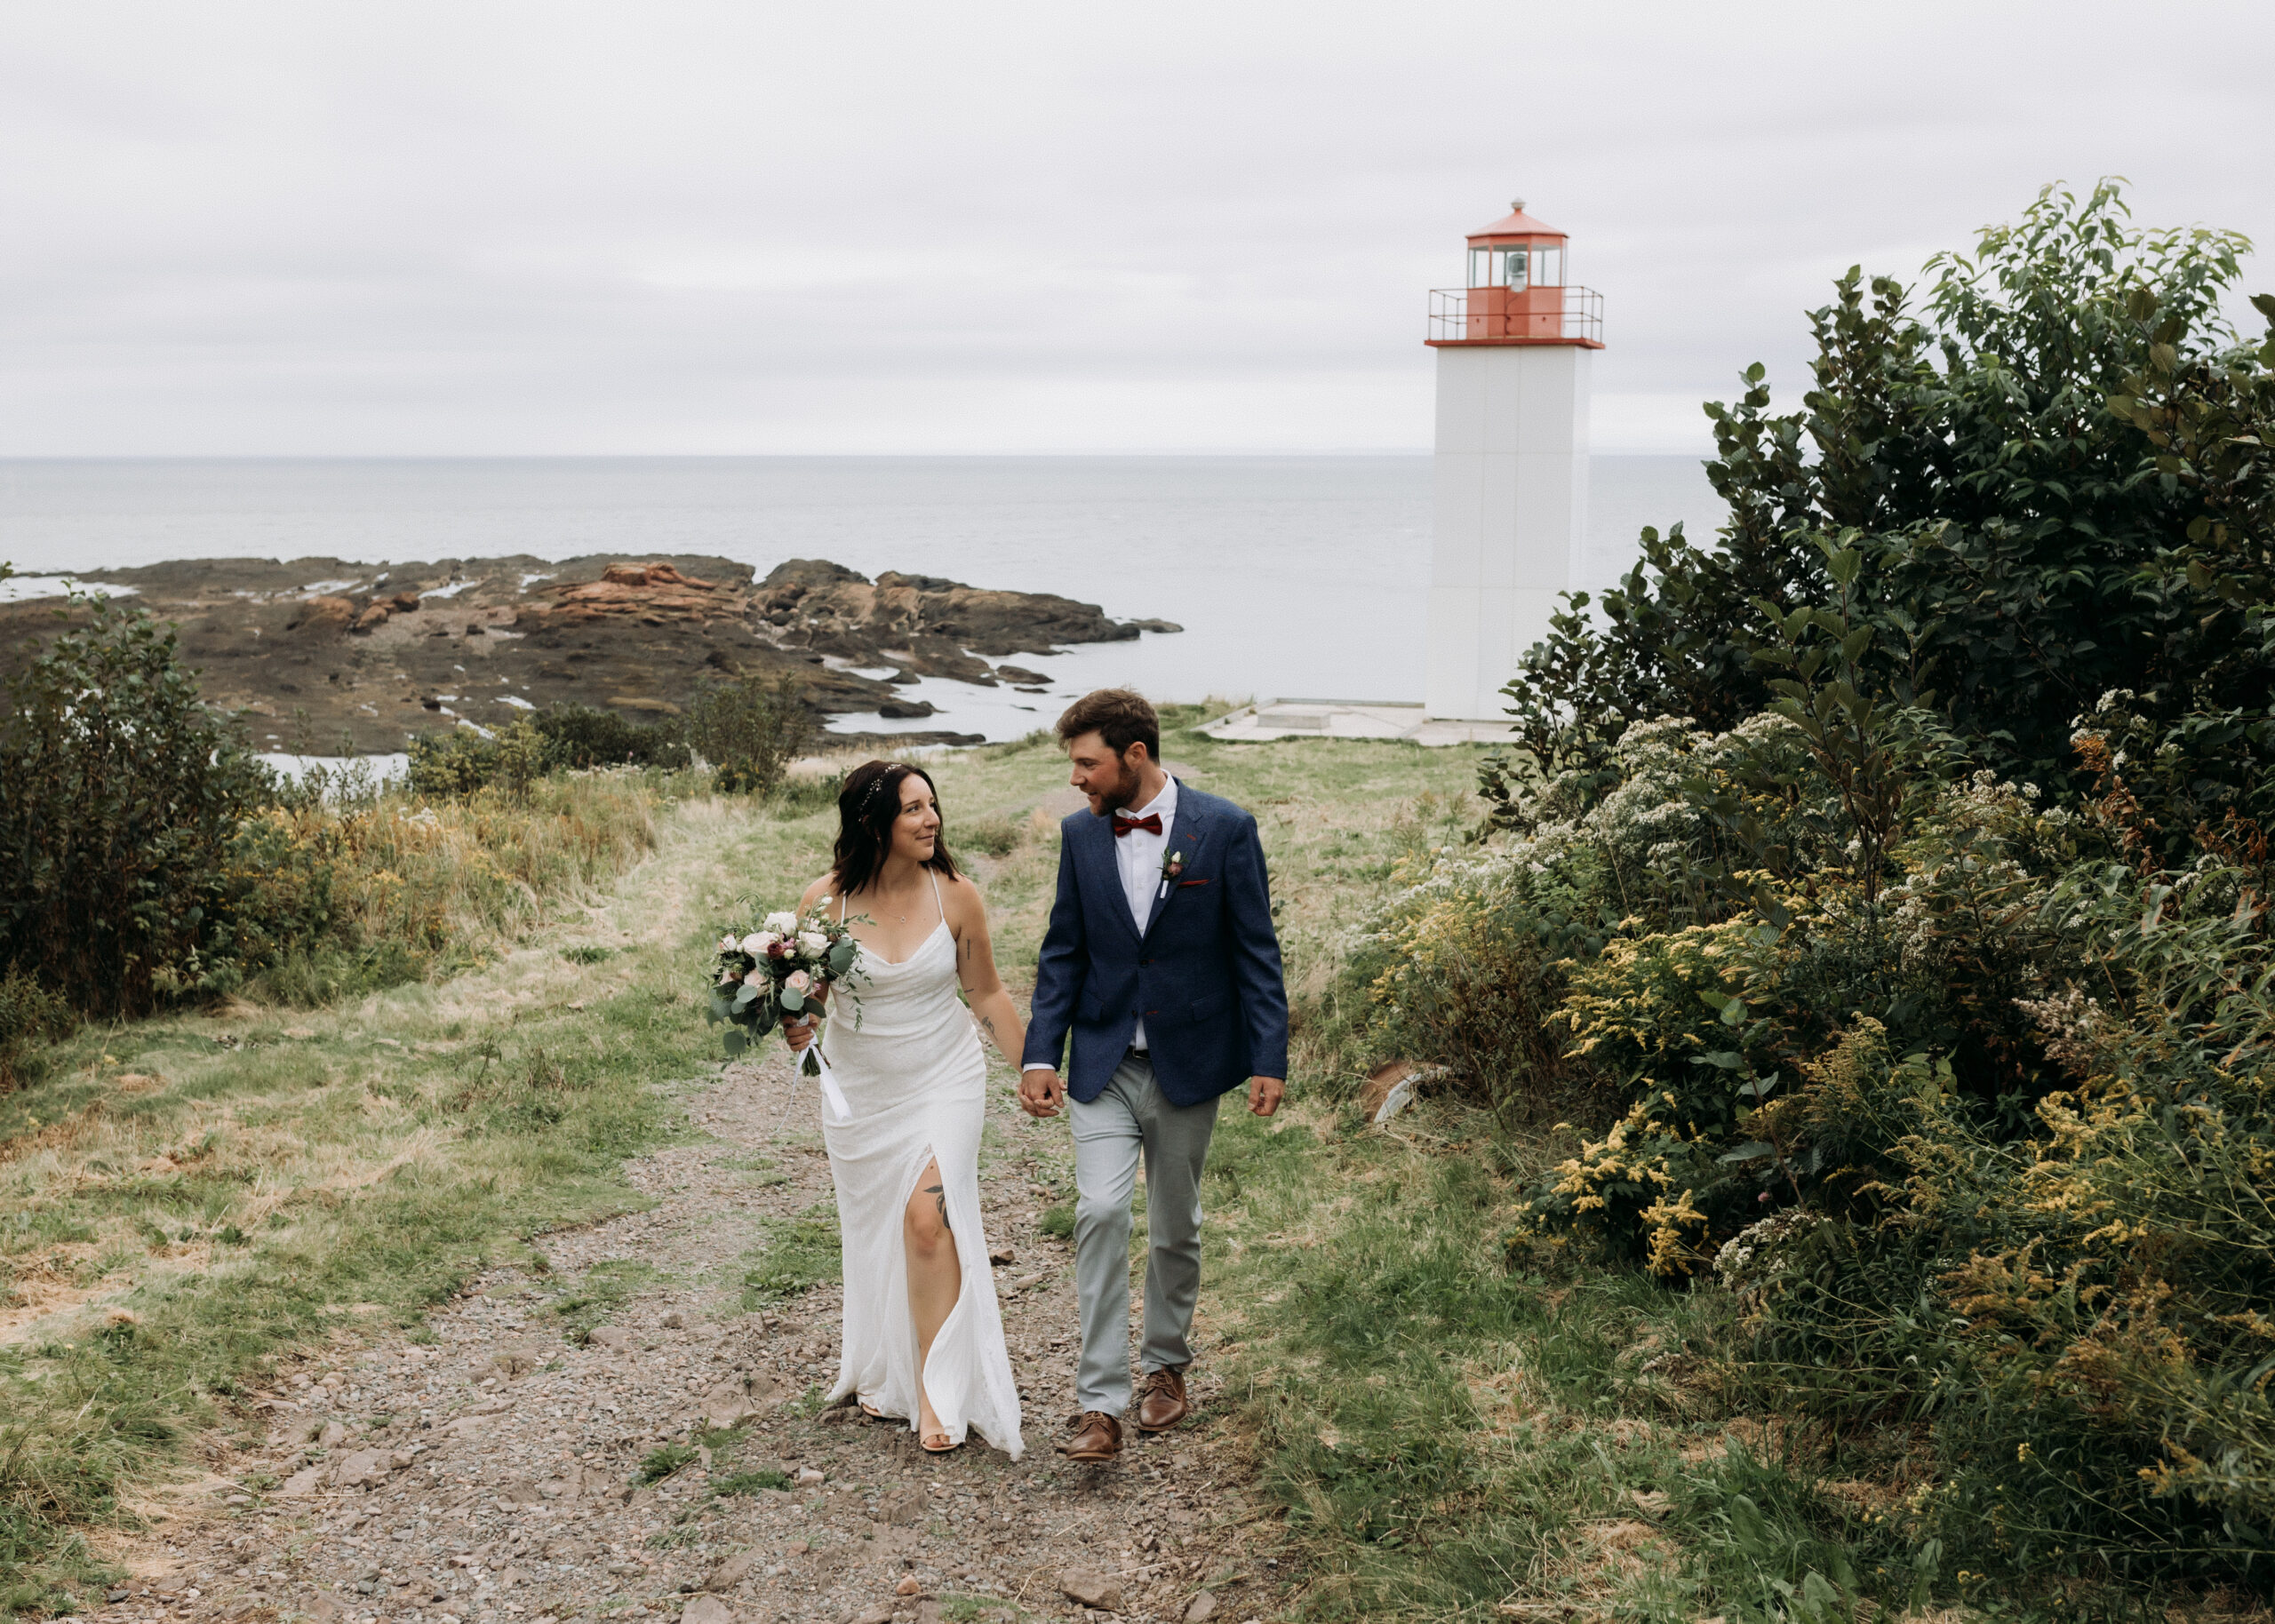 elope in new brunswick. a newly married couple walks hand in hand towards the camera. the ocean and a lighthouse are behind them in the background.